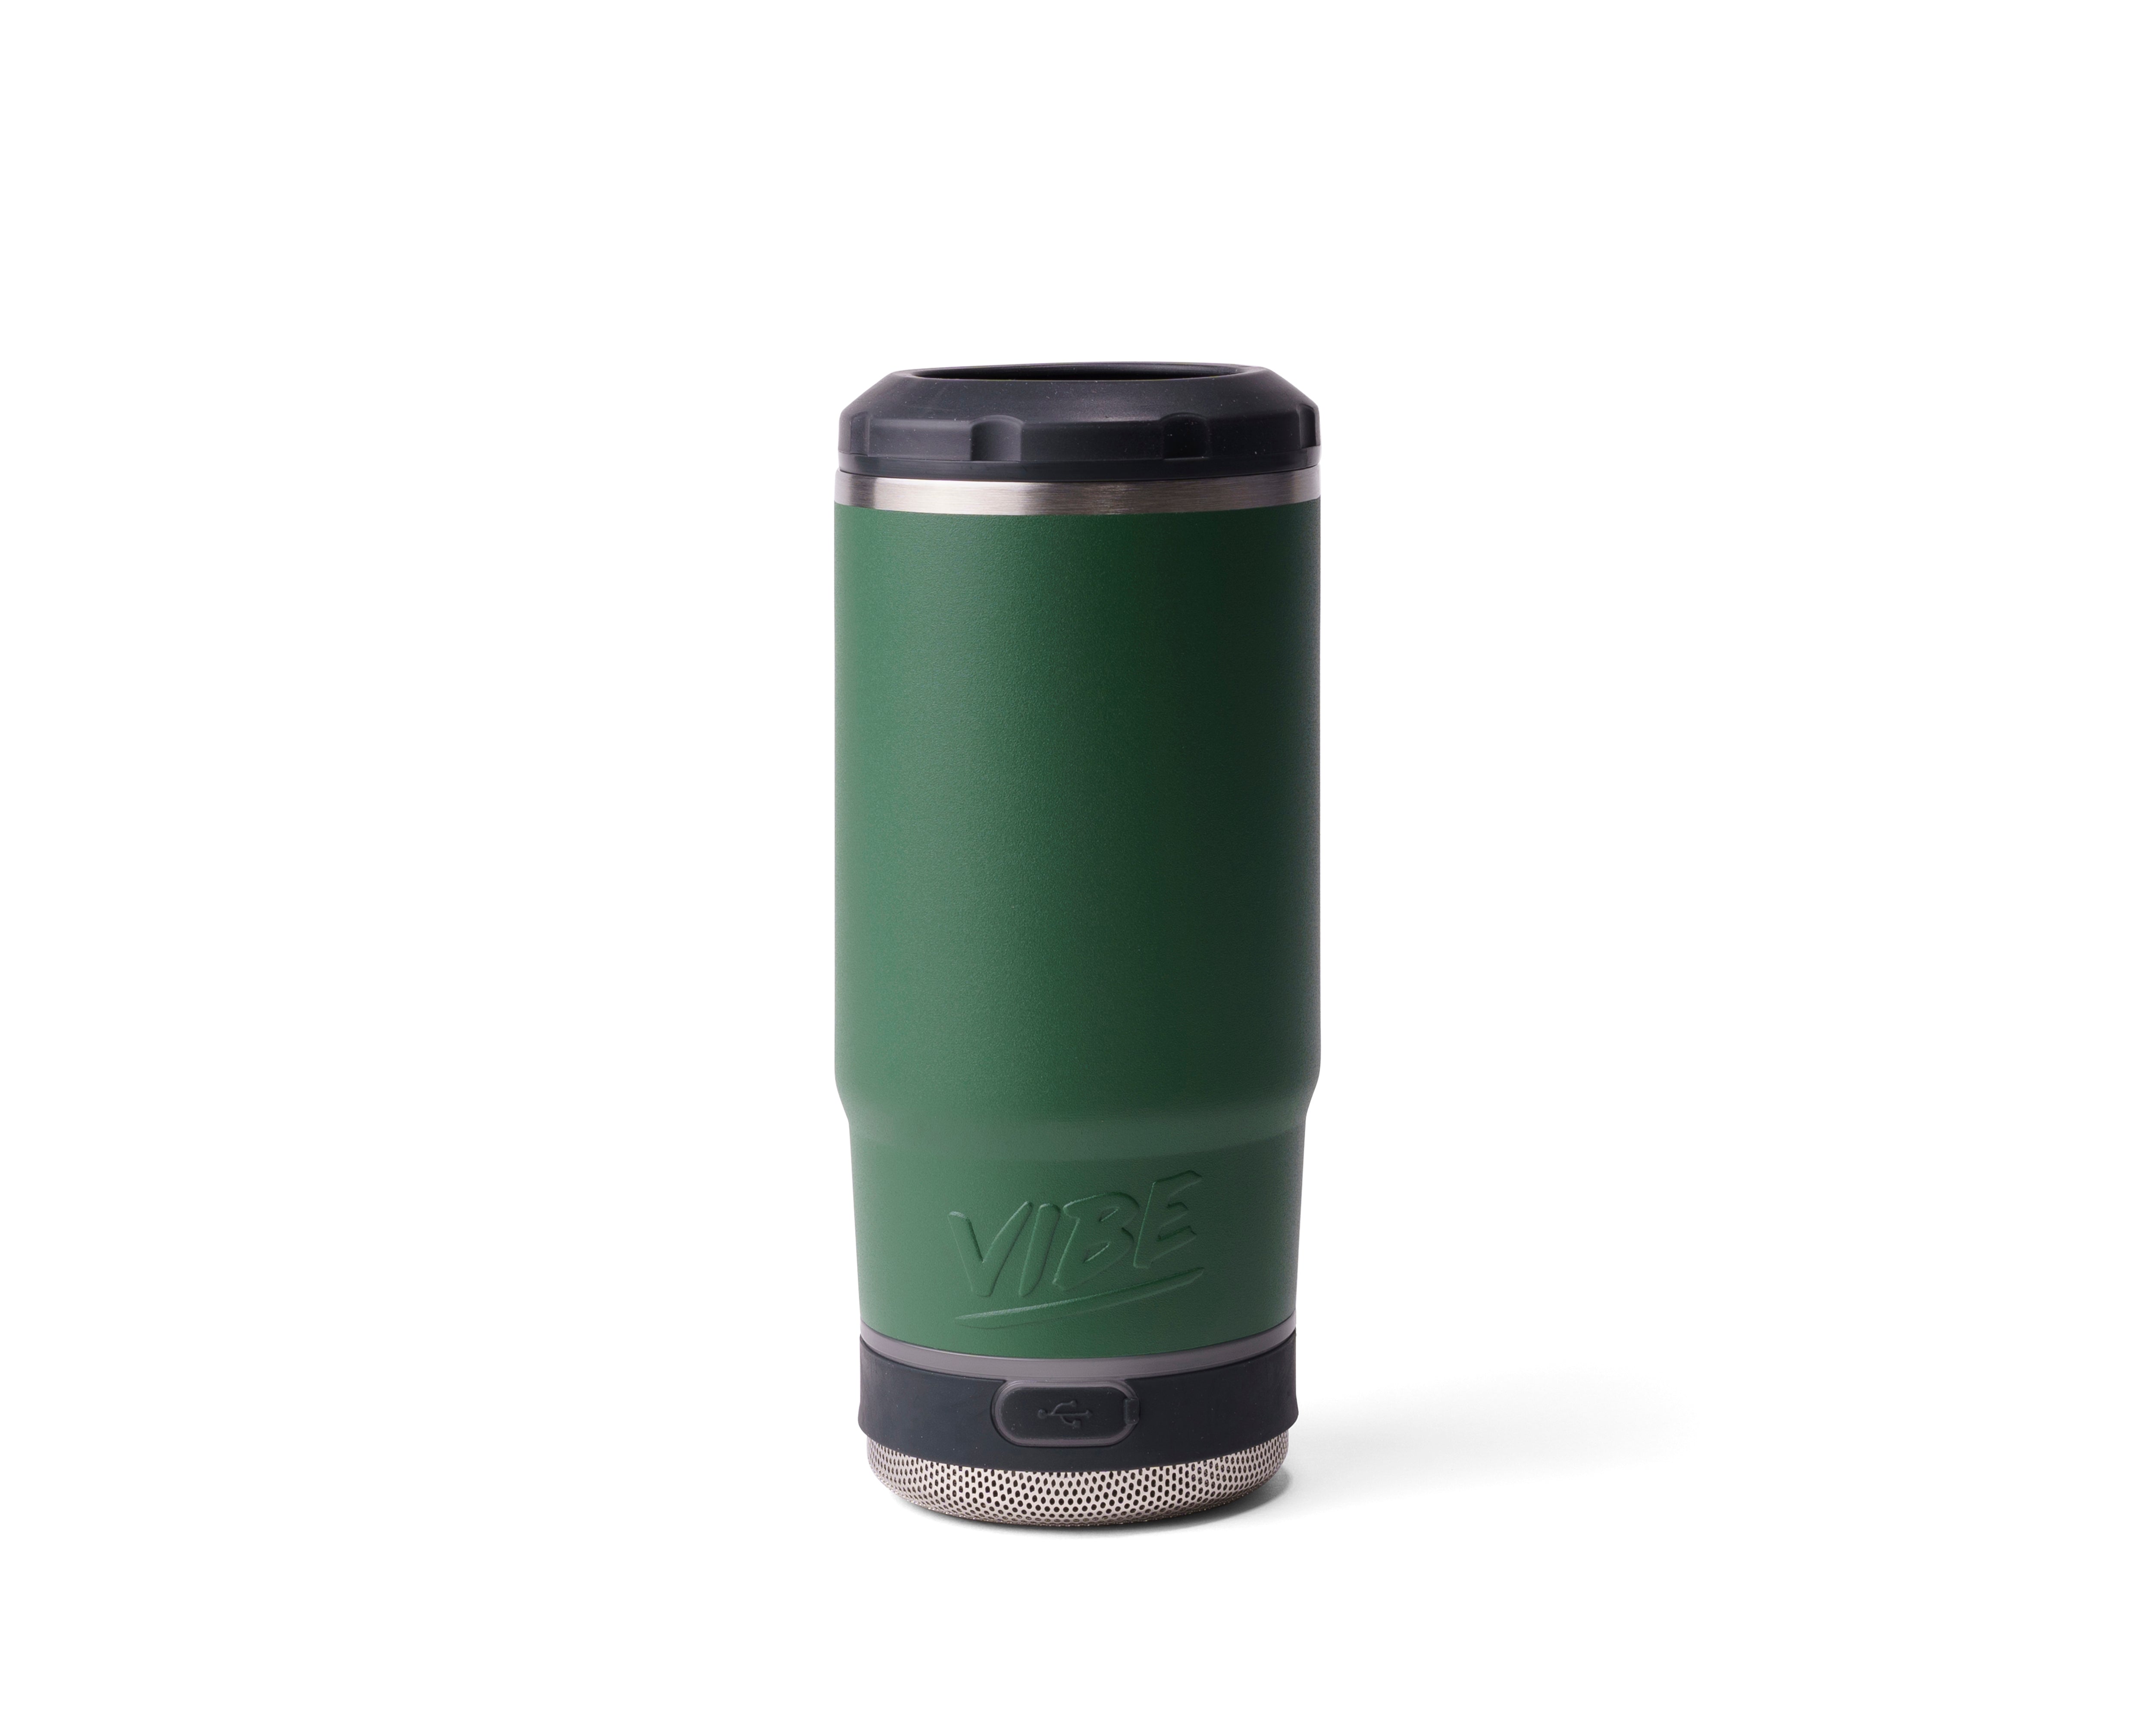 VIBE 4-IN-1 Drink Cooler  With PRO Speaker Attachment – Vibe Tumblers